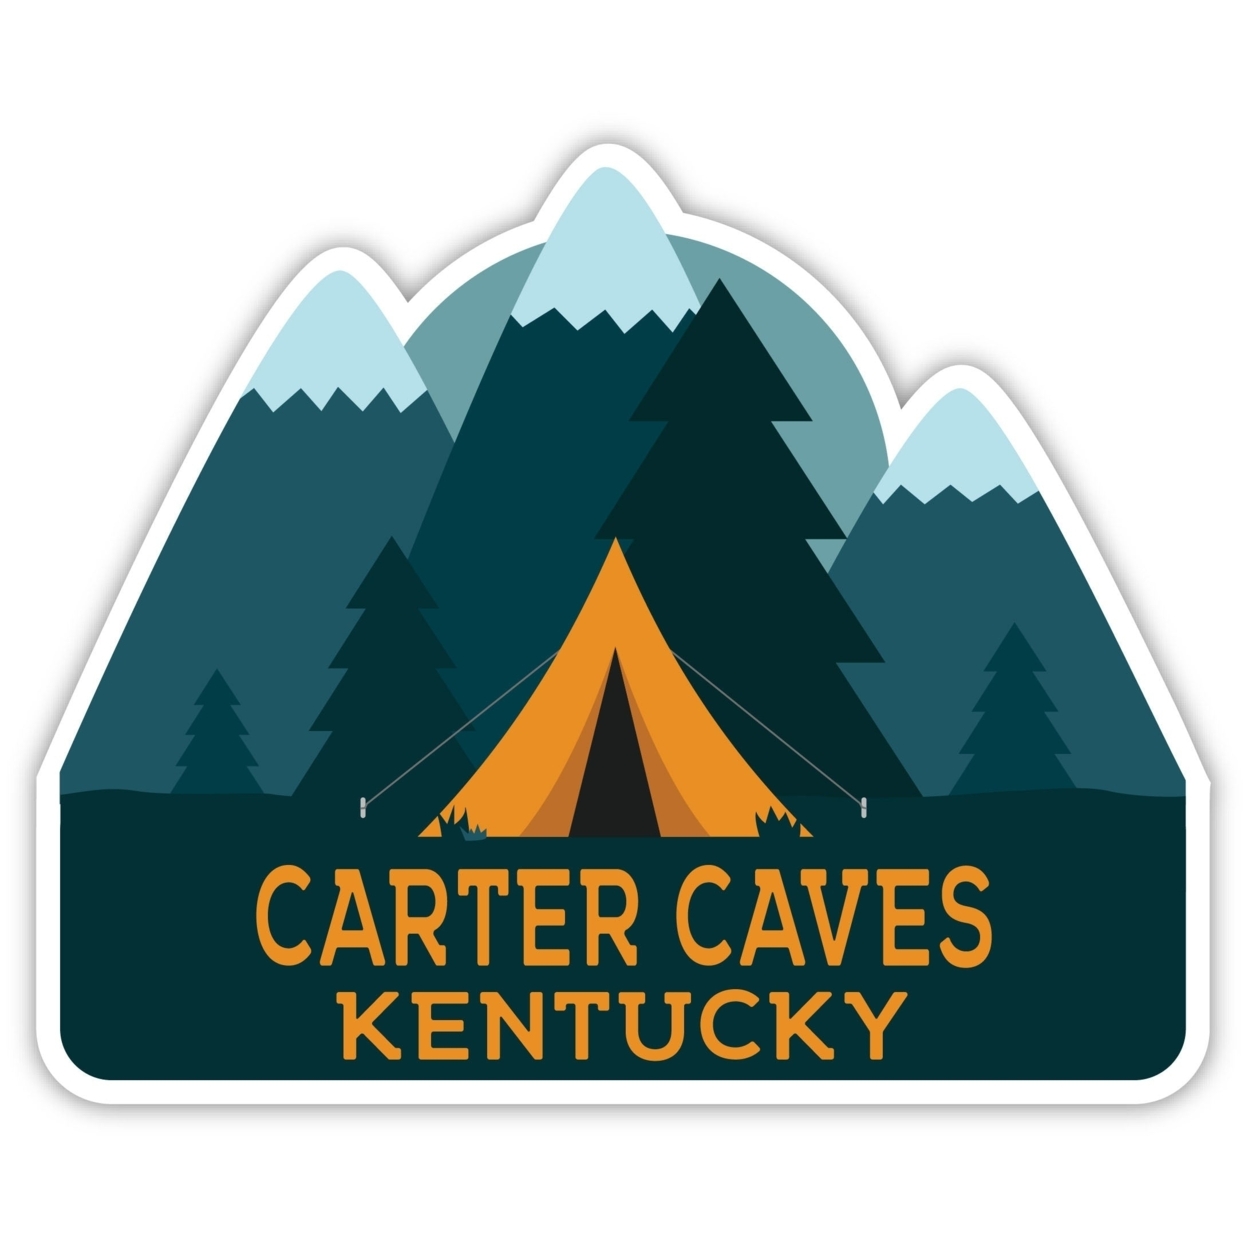 Carter Caves Kentucky Souvenir Decorative Stickers (Choose Theme And Size) - Single Unit, 12-Inch, Tent